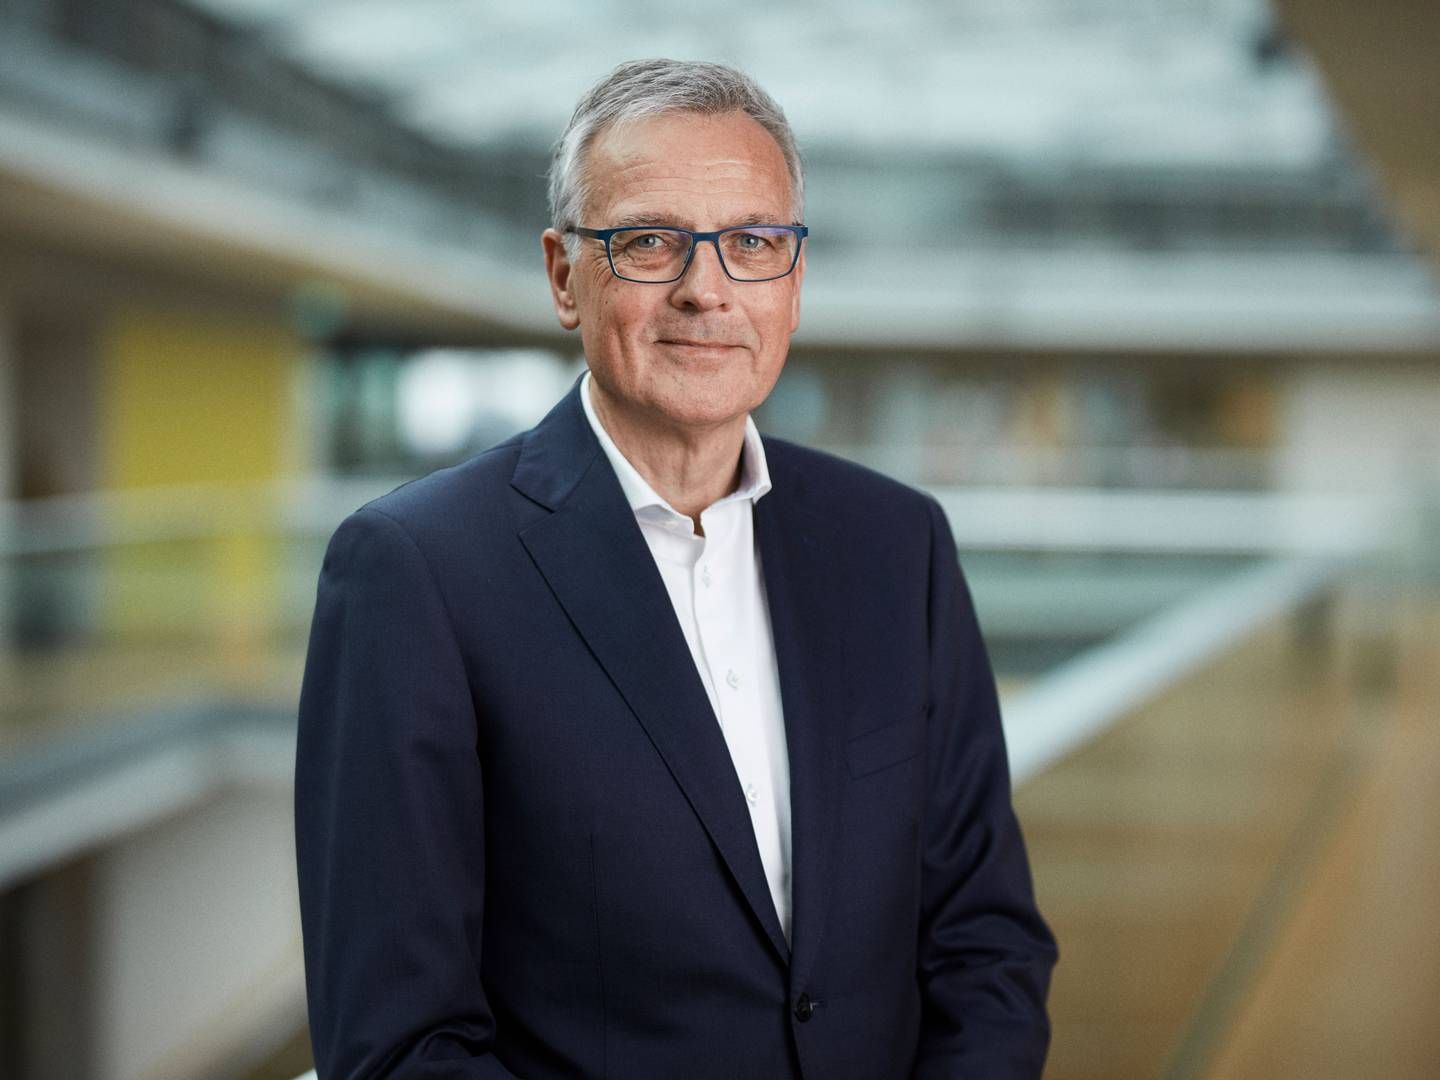 Claus Valentin Hemmingsen has been warming up for the position as chairman of the Ramboll Group for a year, during which he has served as vice chair. "There wasn't much to think about, it was just getting on with the job," he says. | Foto: Rambøll / Ture Andersen